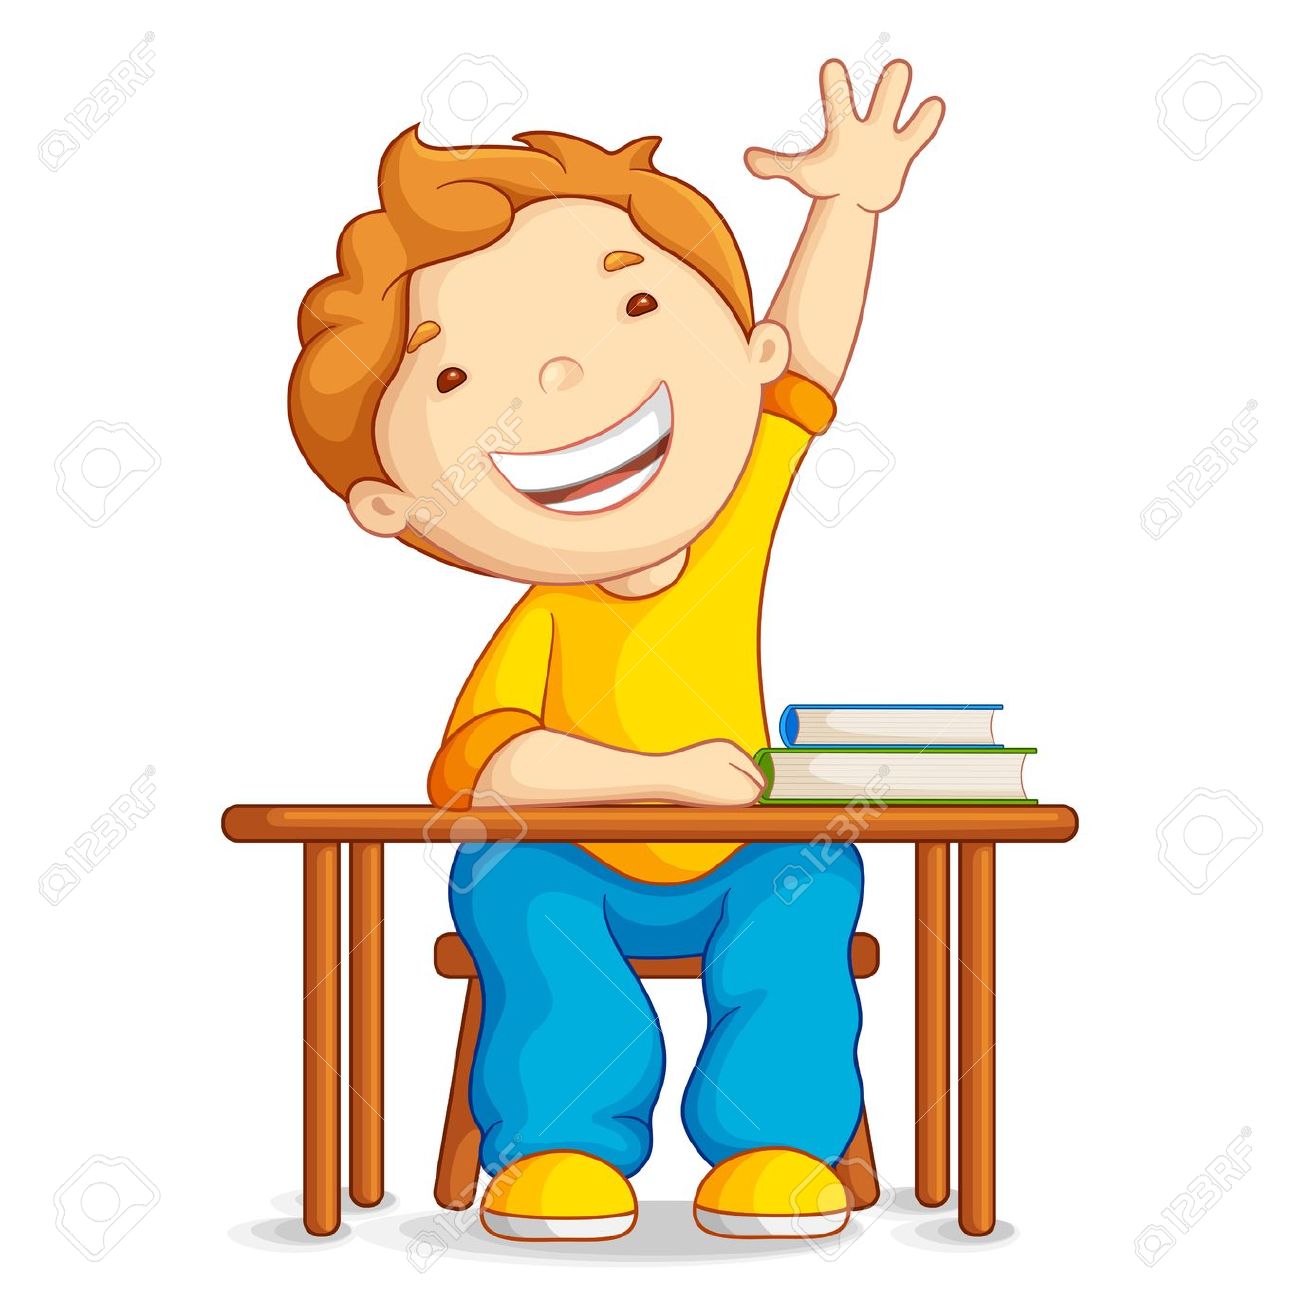 Happy Students Clipart